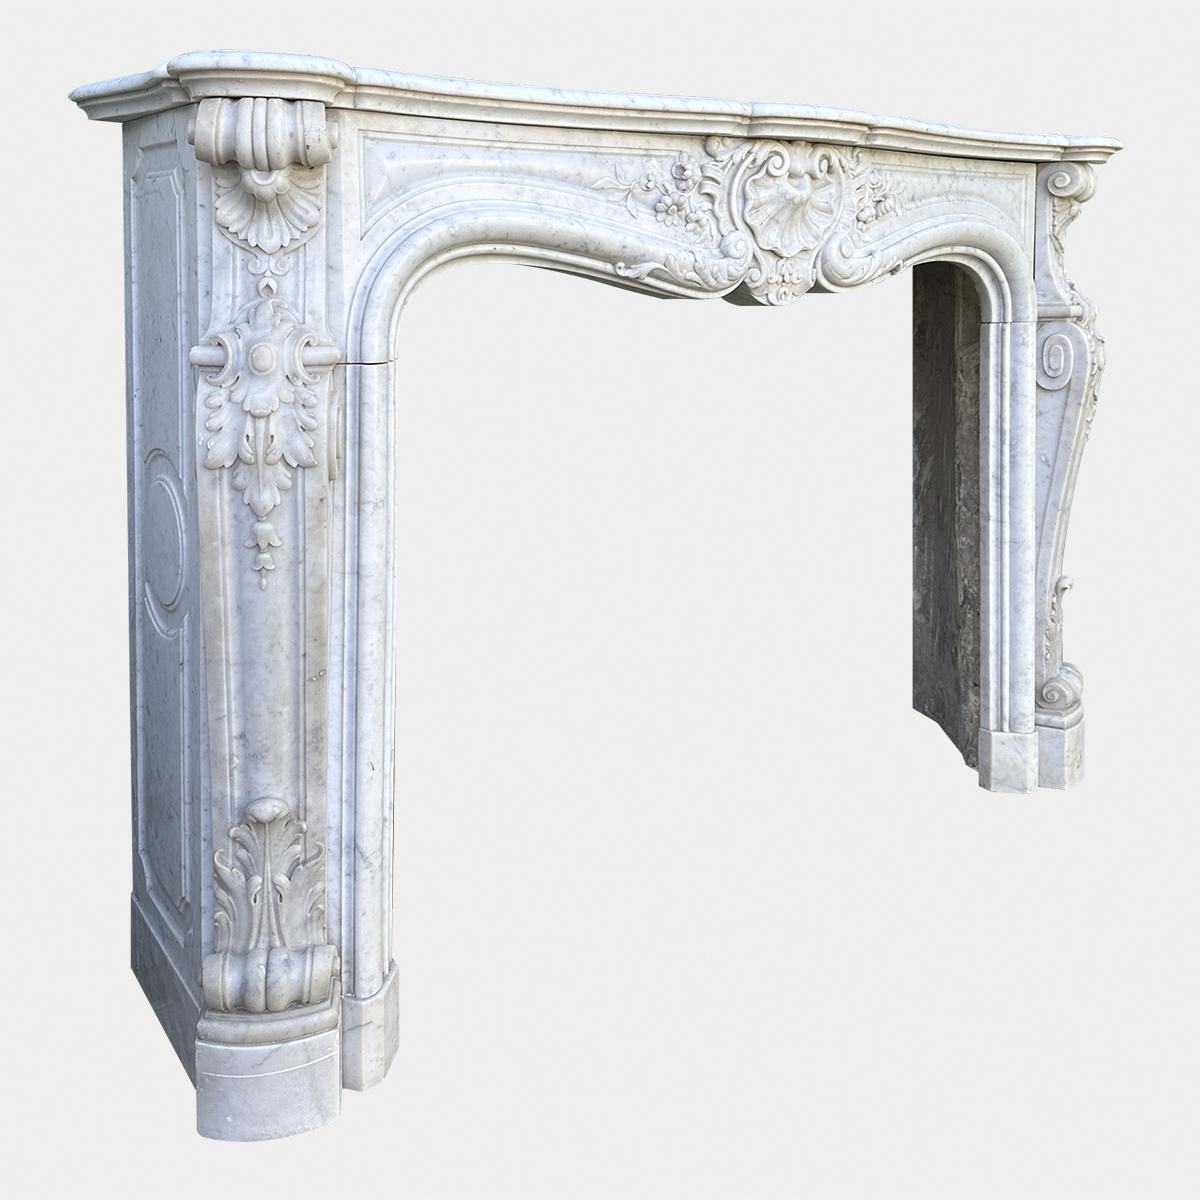 A very good quality late 18th c Louis XV marble fireplace. Executed in Italian Carrara marble, with superior carvings in the Rococo taste. The serpentine shelf above a paneled frieze with an  A symmetrical carved central cartouche typical of the